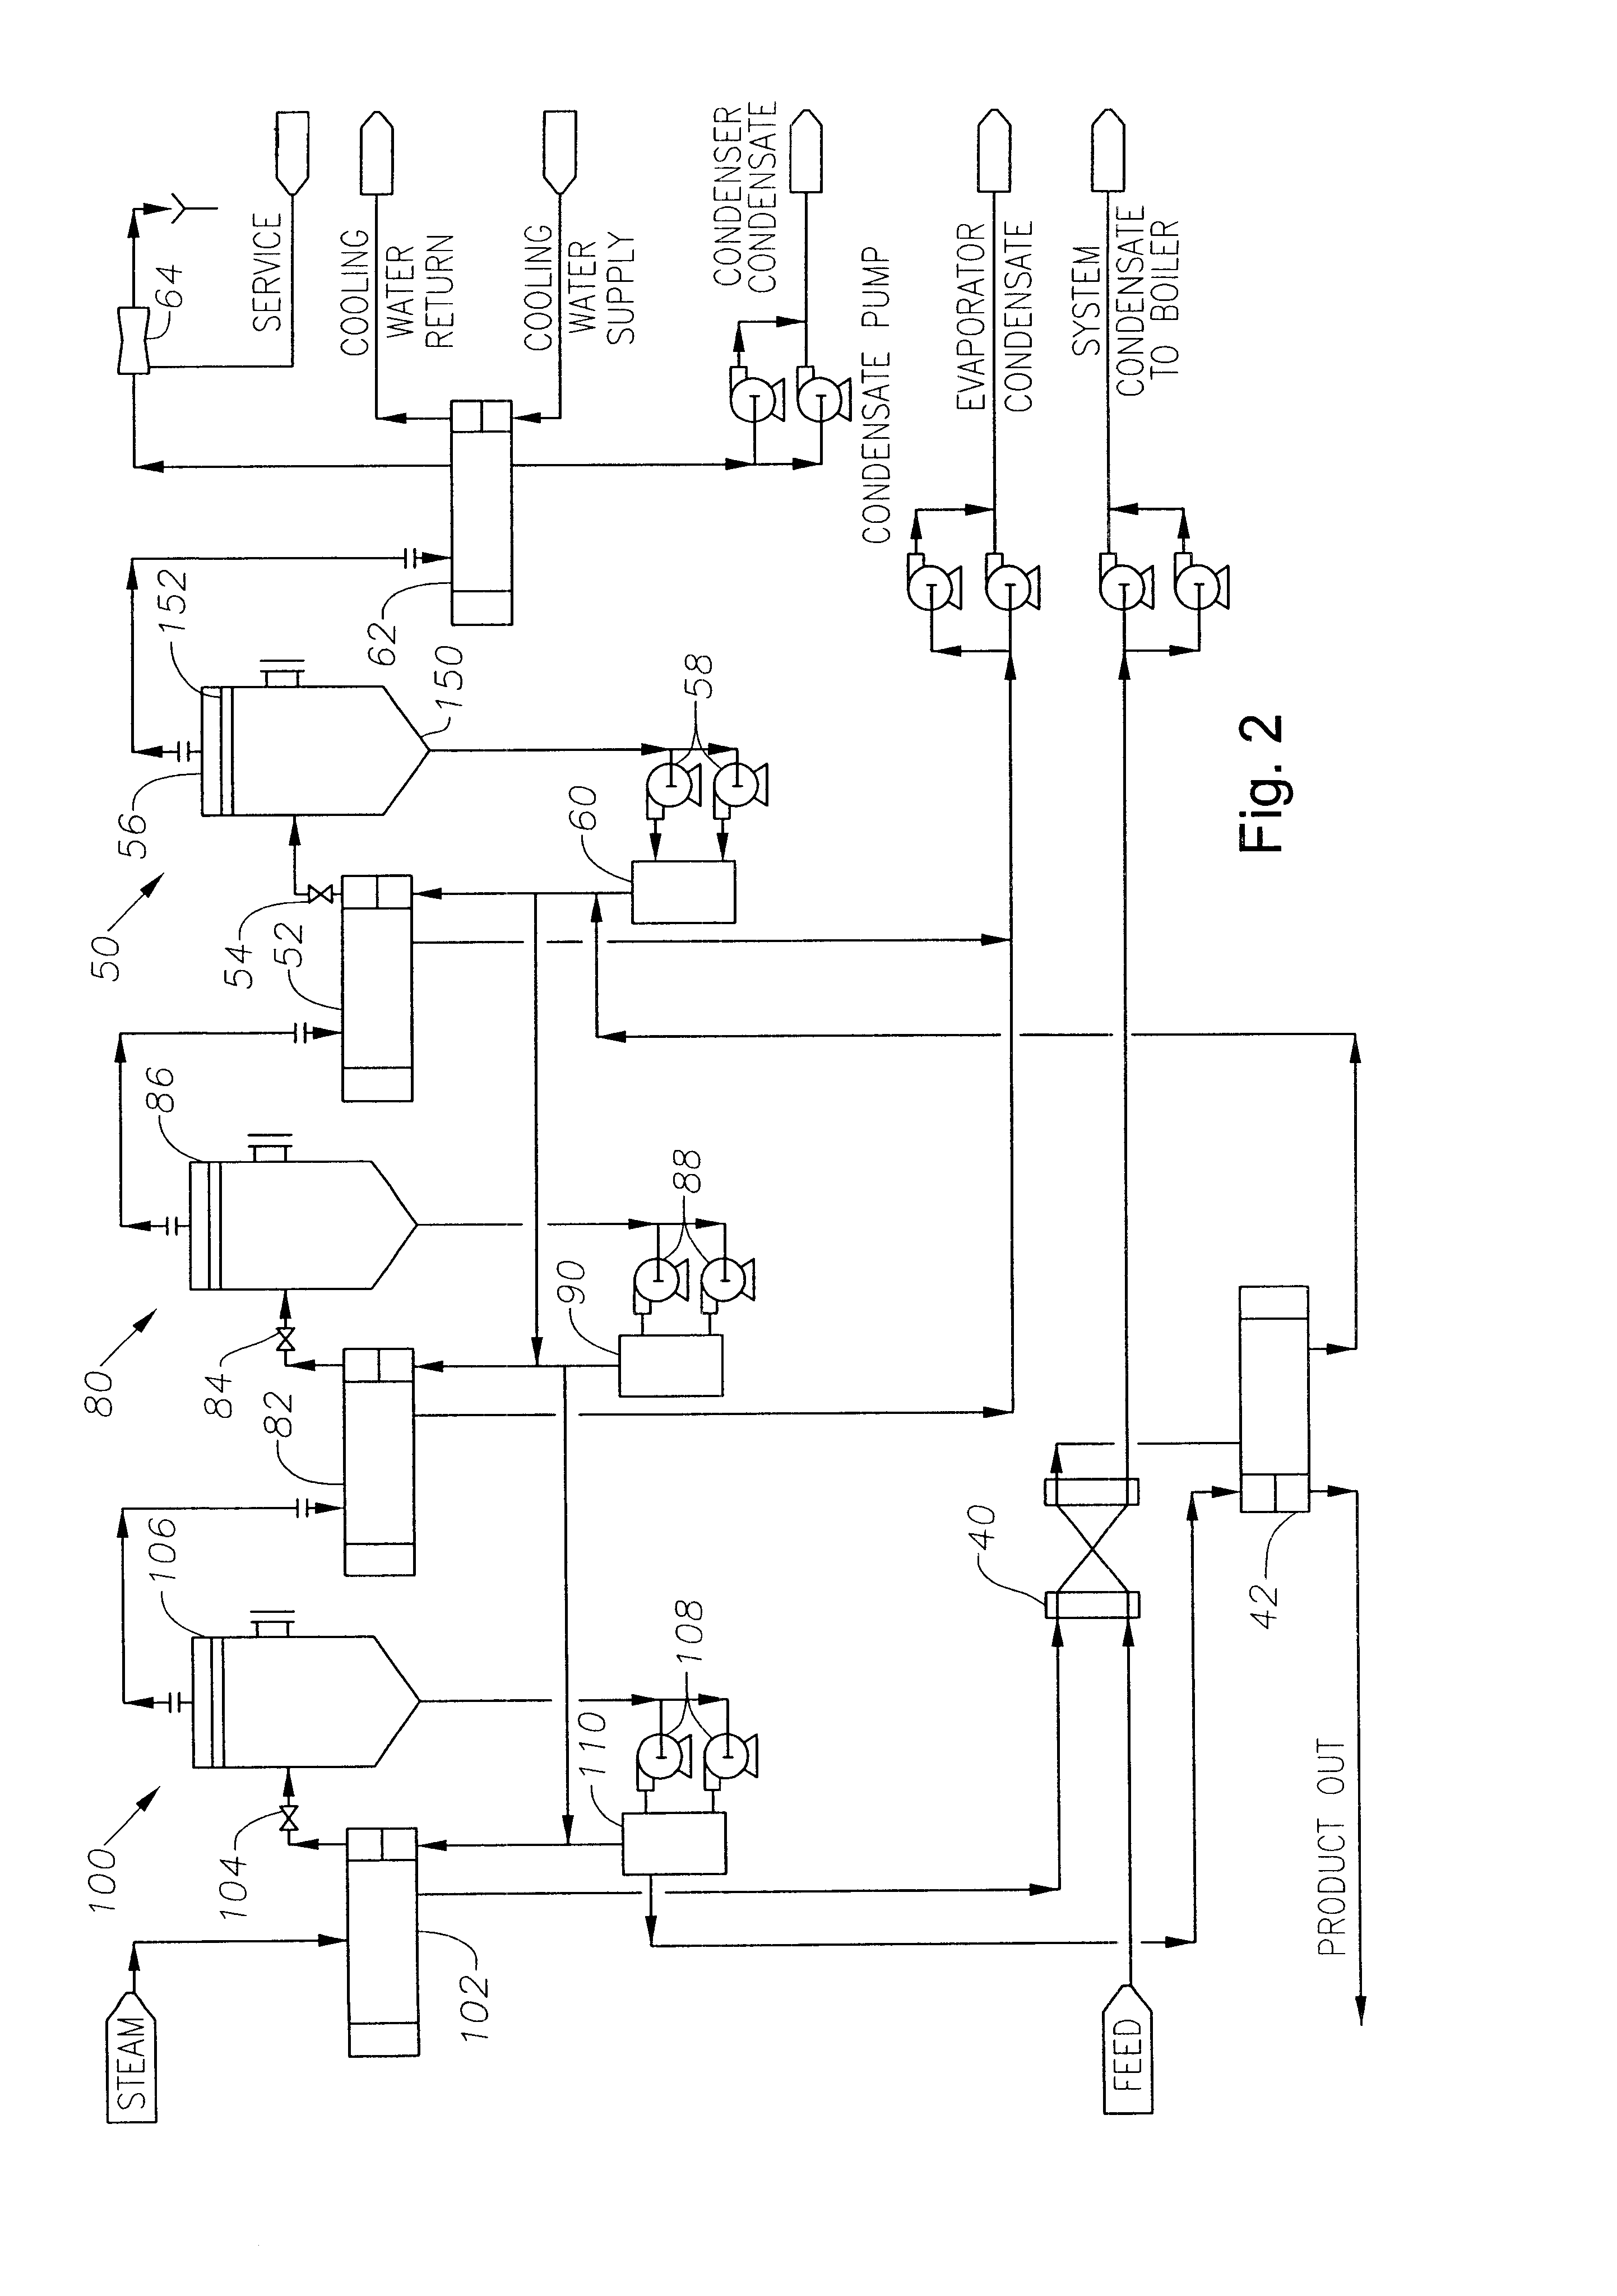 System for recovering glycol from glycol/brine streams